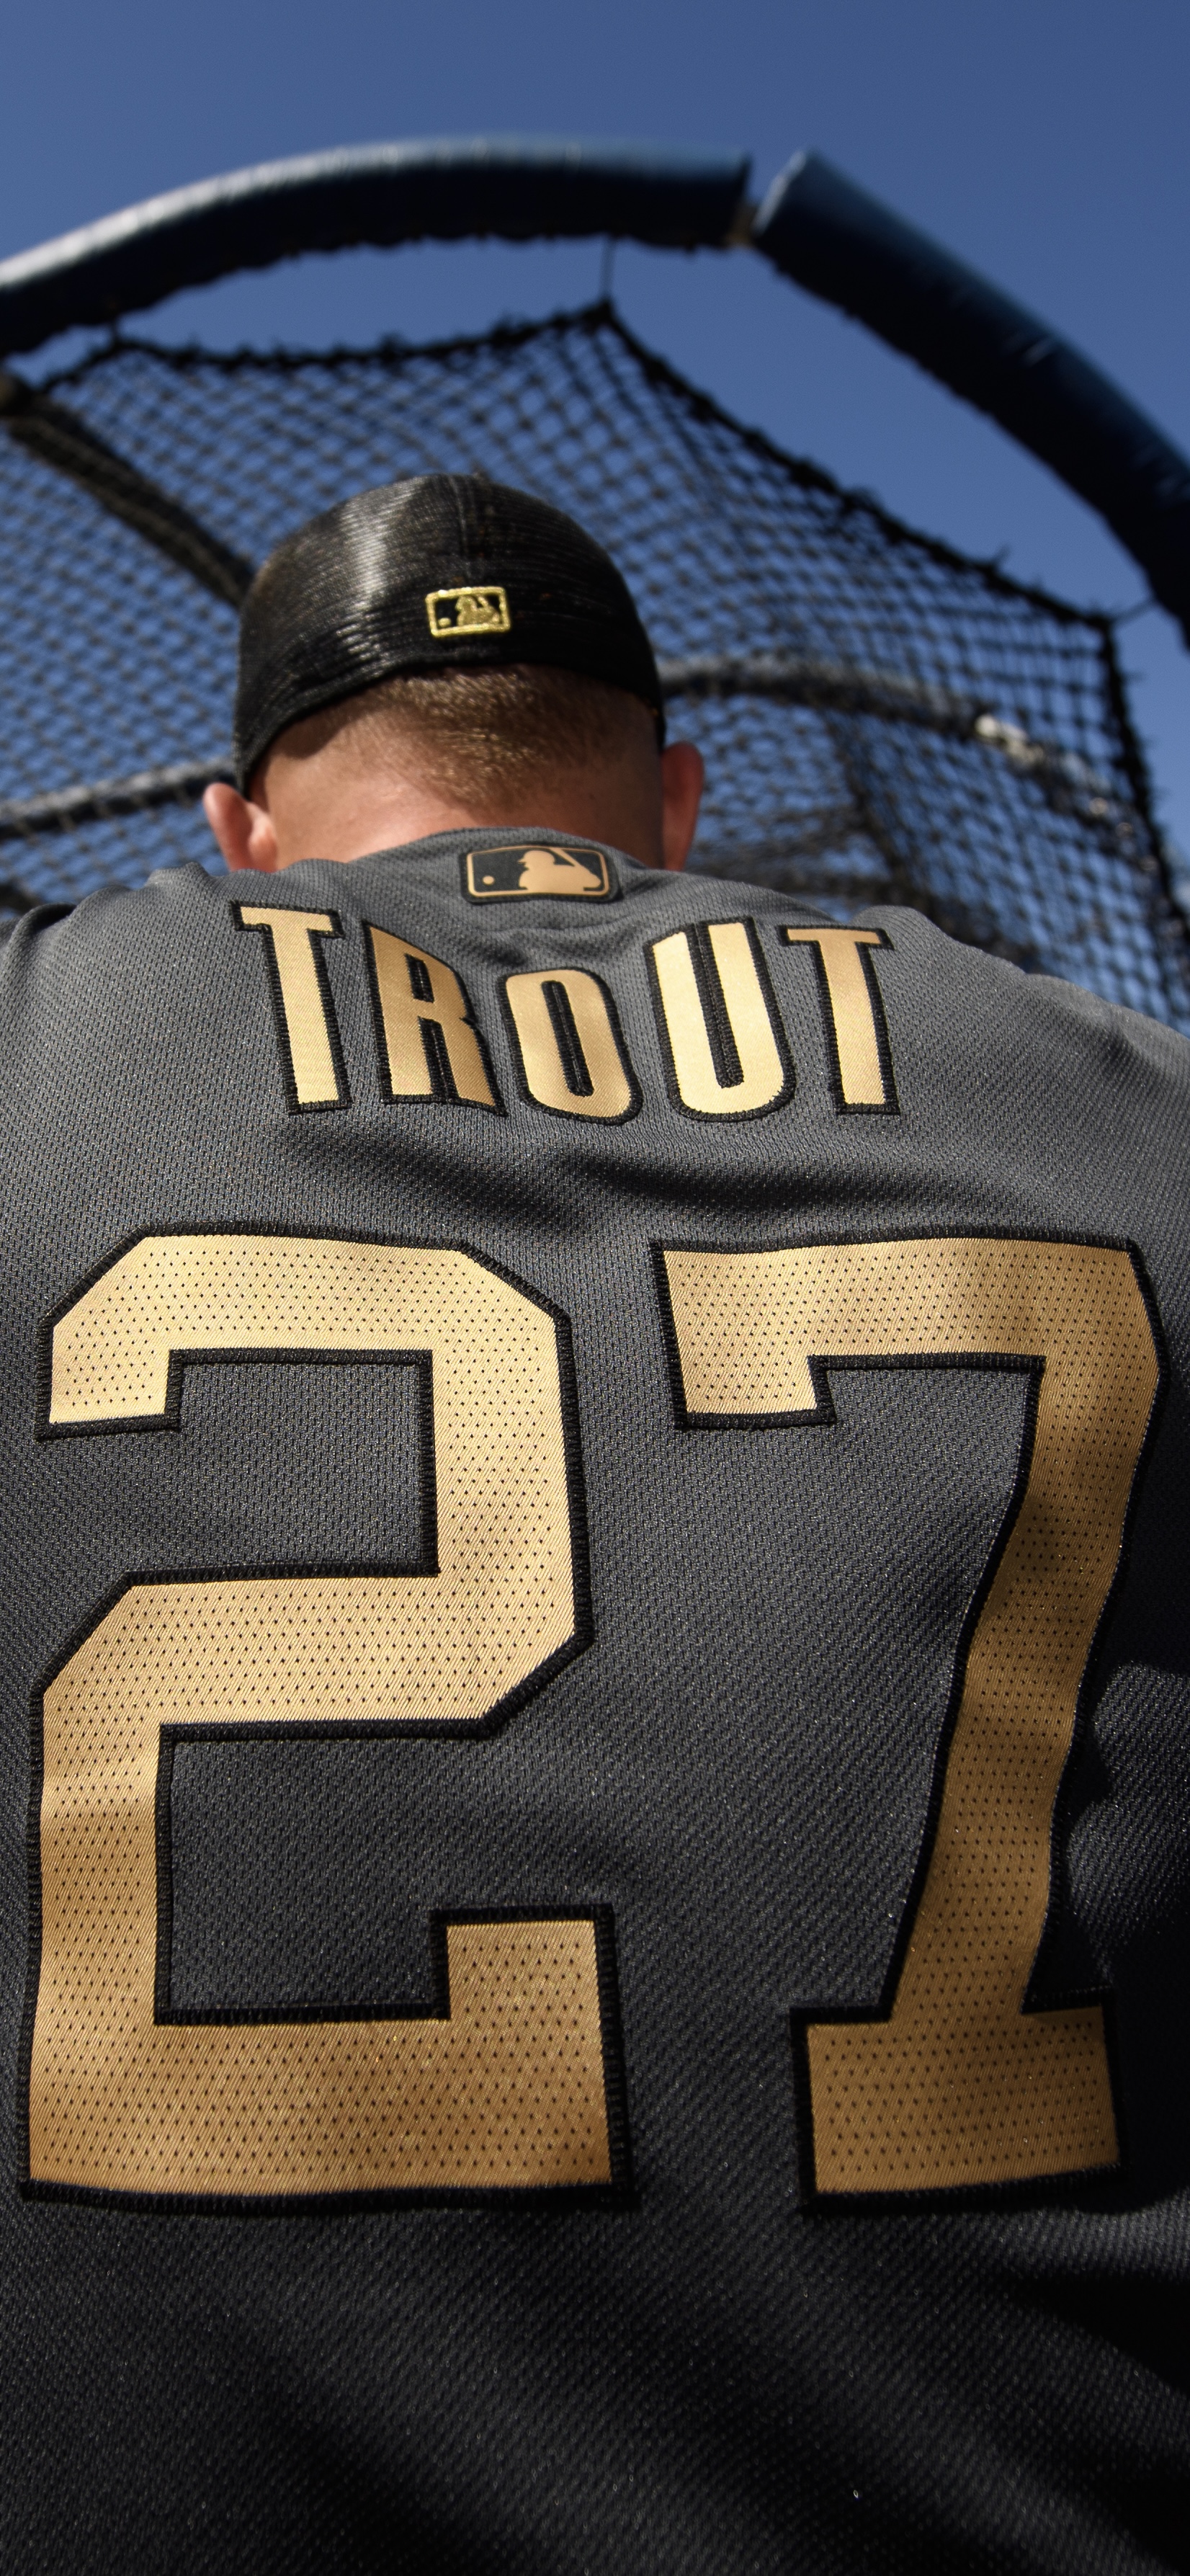 trout all star jersey 2022